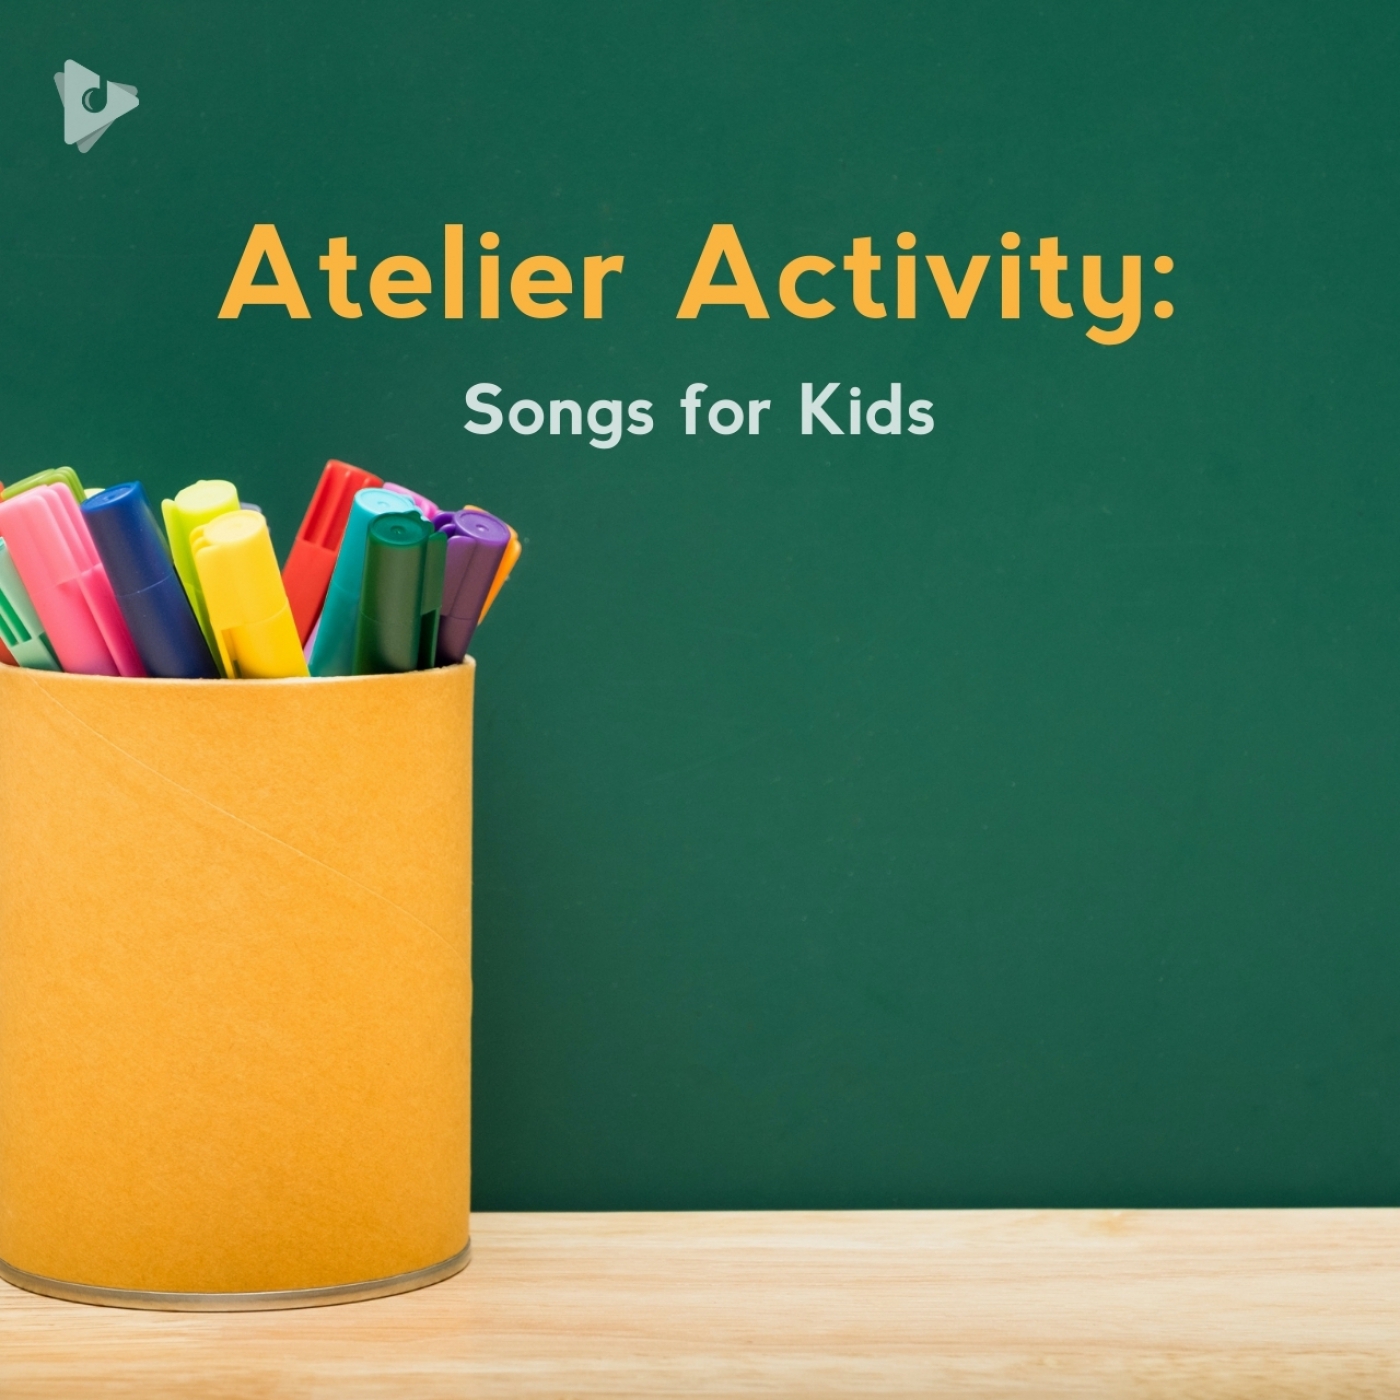 Atelier Activity: Songs for Kids